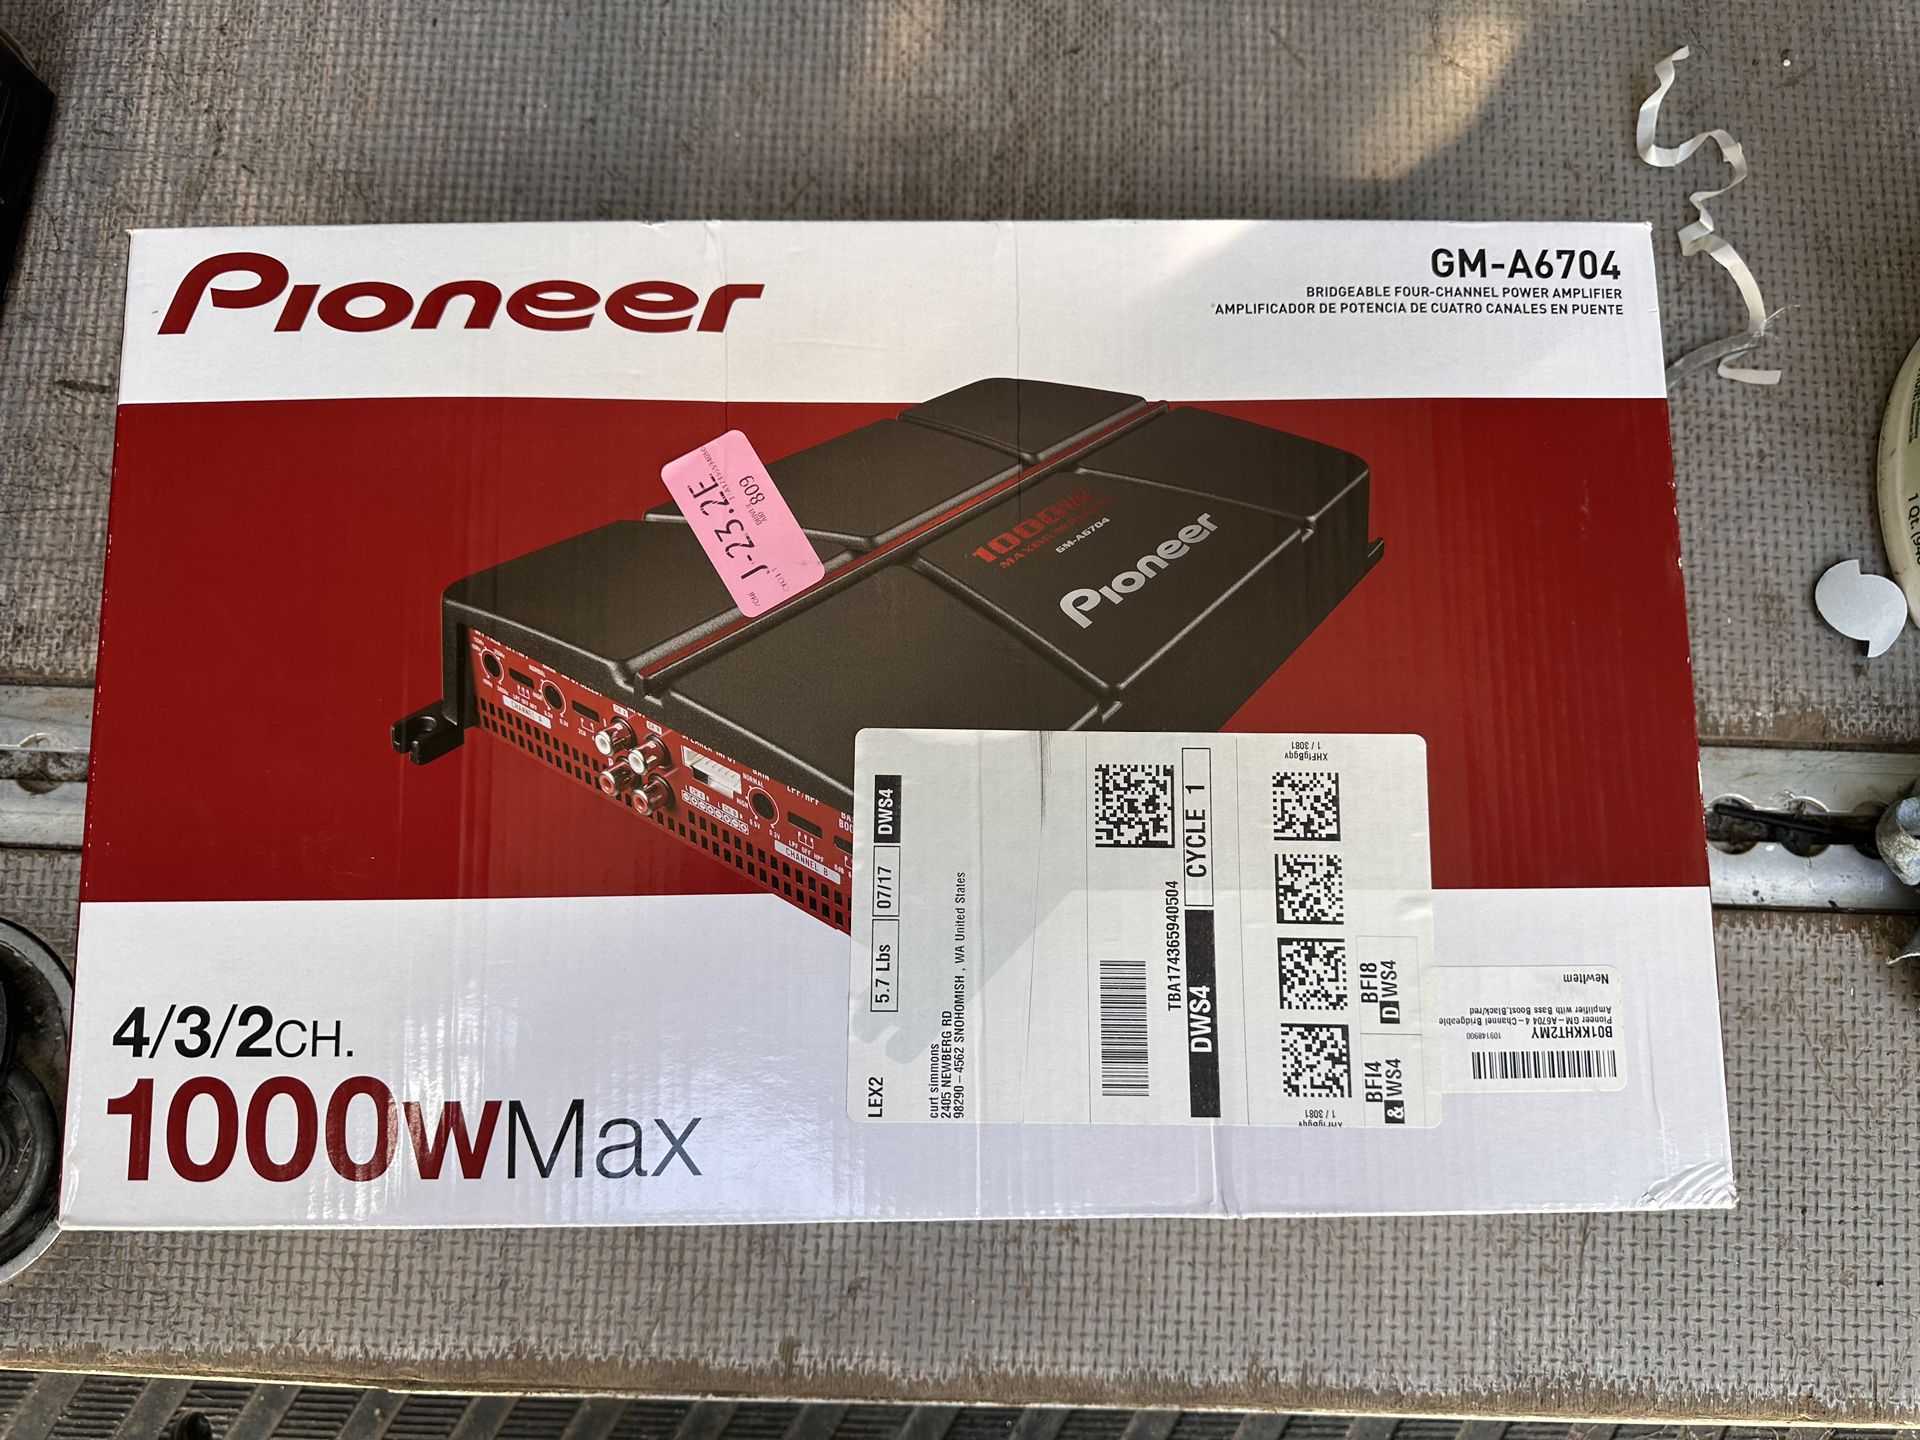 Pioneer Amp GM-A6704 Brand New 